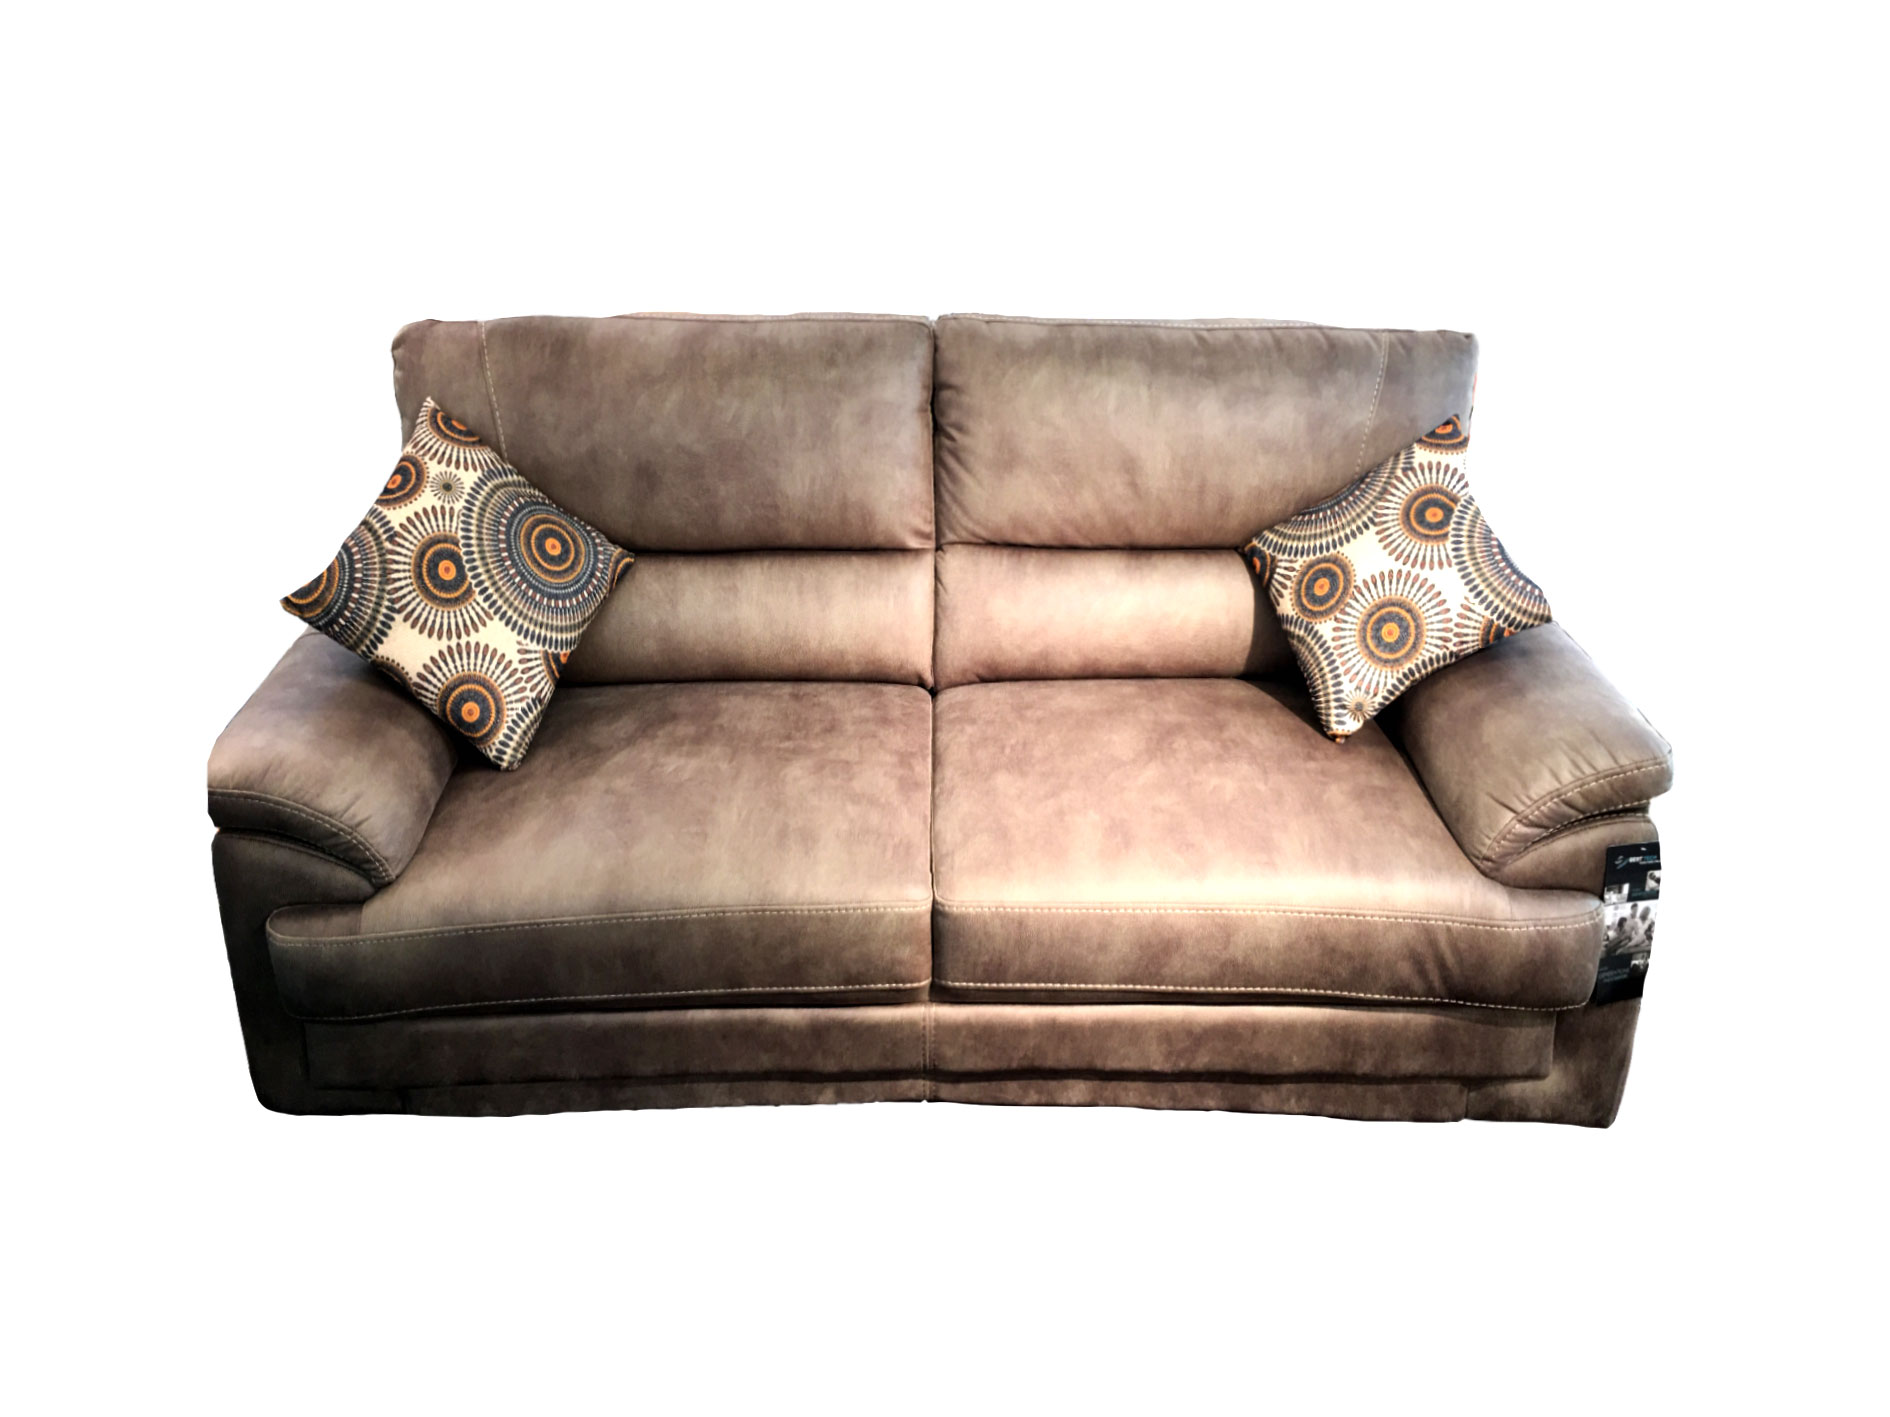 Cheers Sofa - 9559 L3 - 3 Seater Fabric Sofa | Best Tech Online Singapore